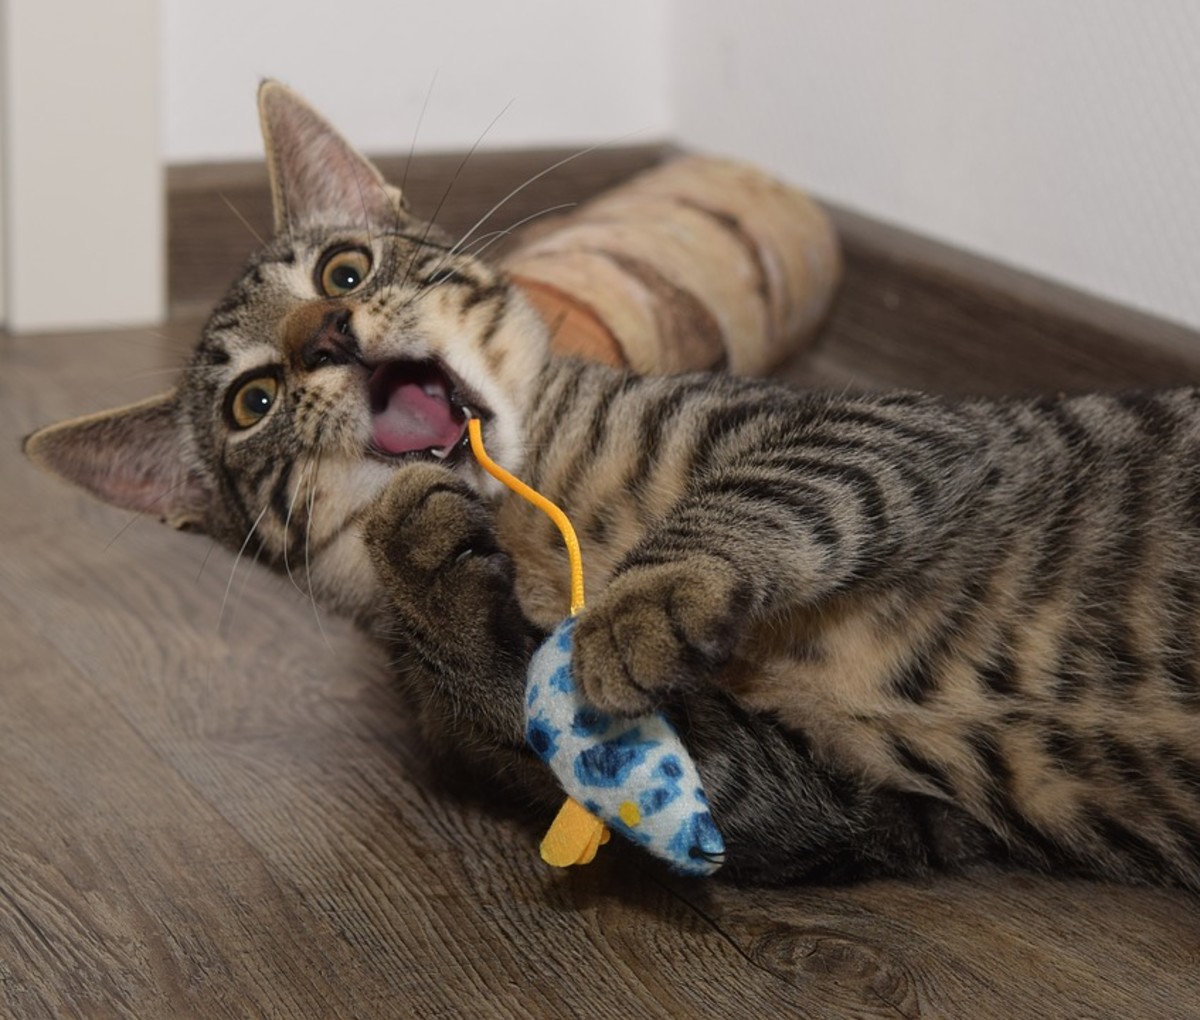 Cats are ferocious hunters who can protect your home from vermin.